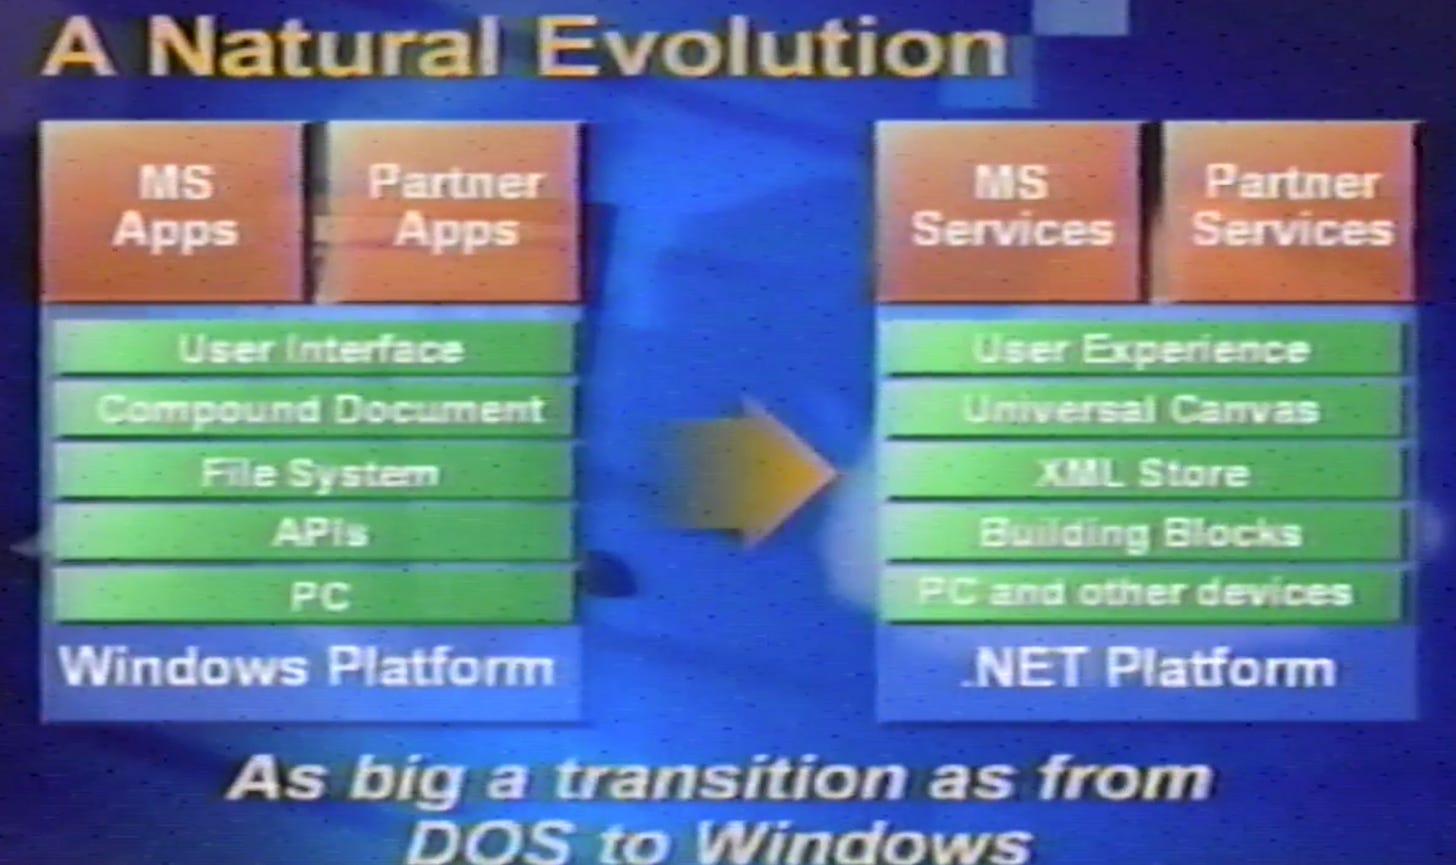 slide: A natural evolution, with subtitle "As big a transition as DOS to Windows" featuring before/after technology stacks.